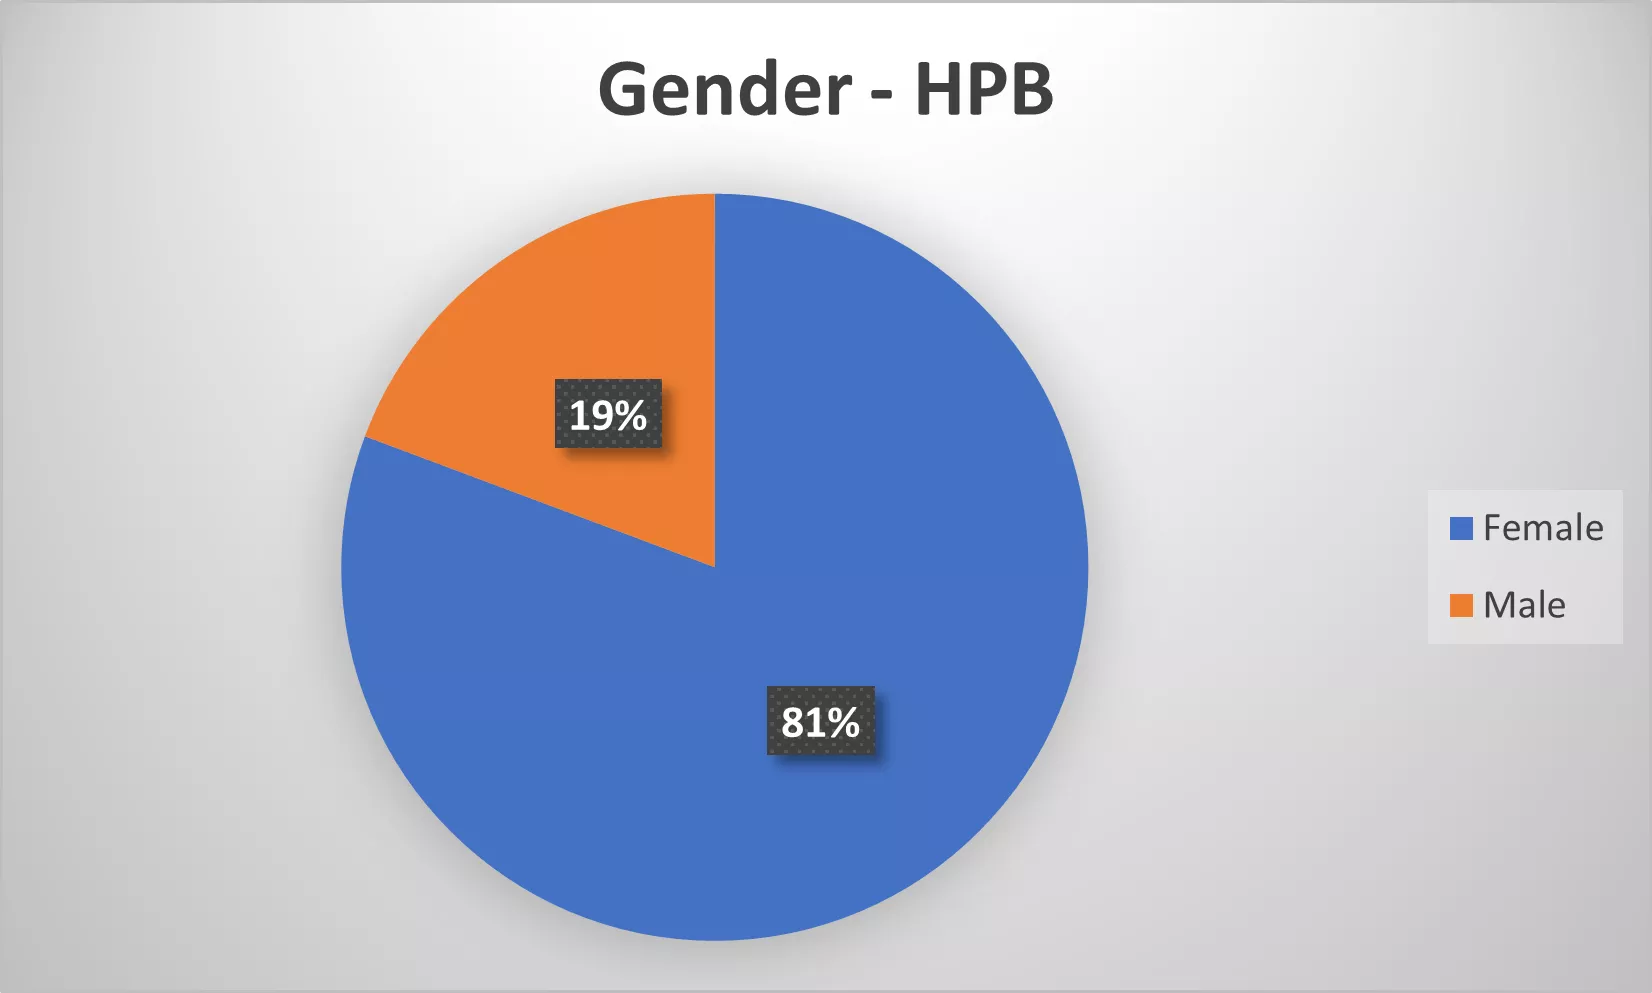 Non-binary Gender is c. 1% at all festivals which is negligible in this chart